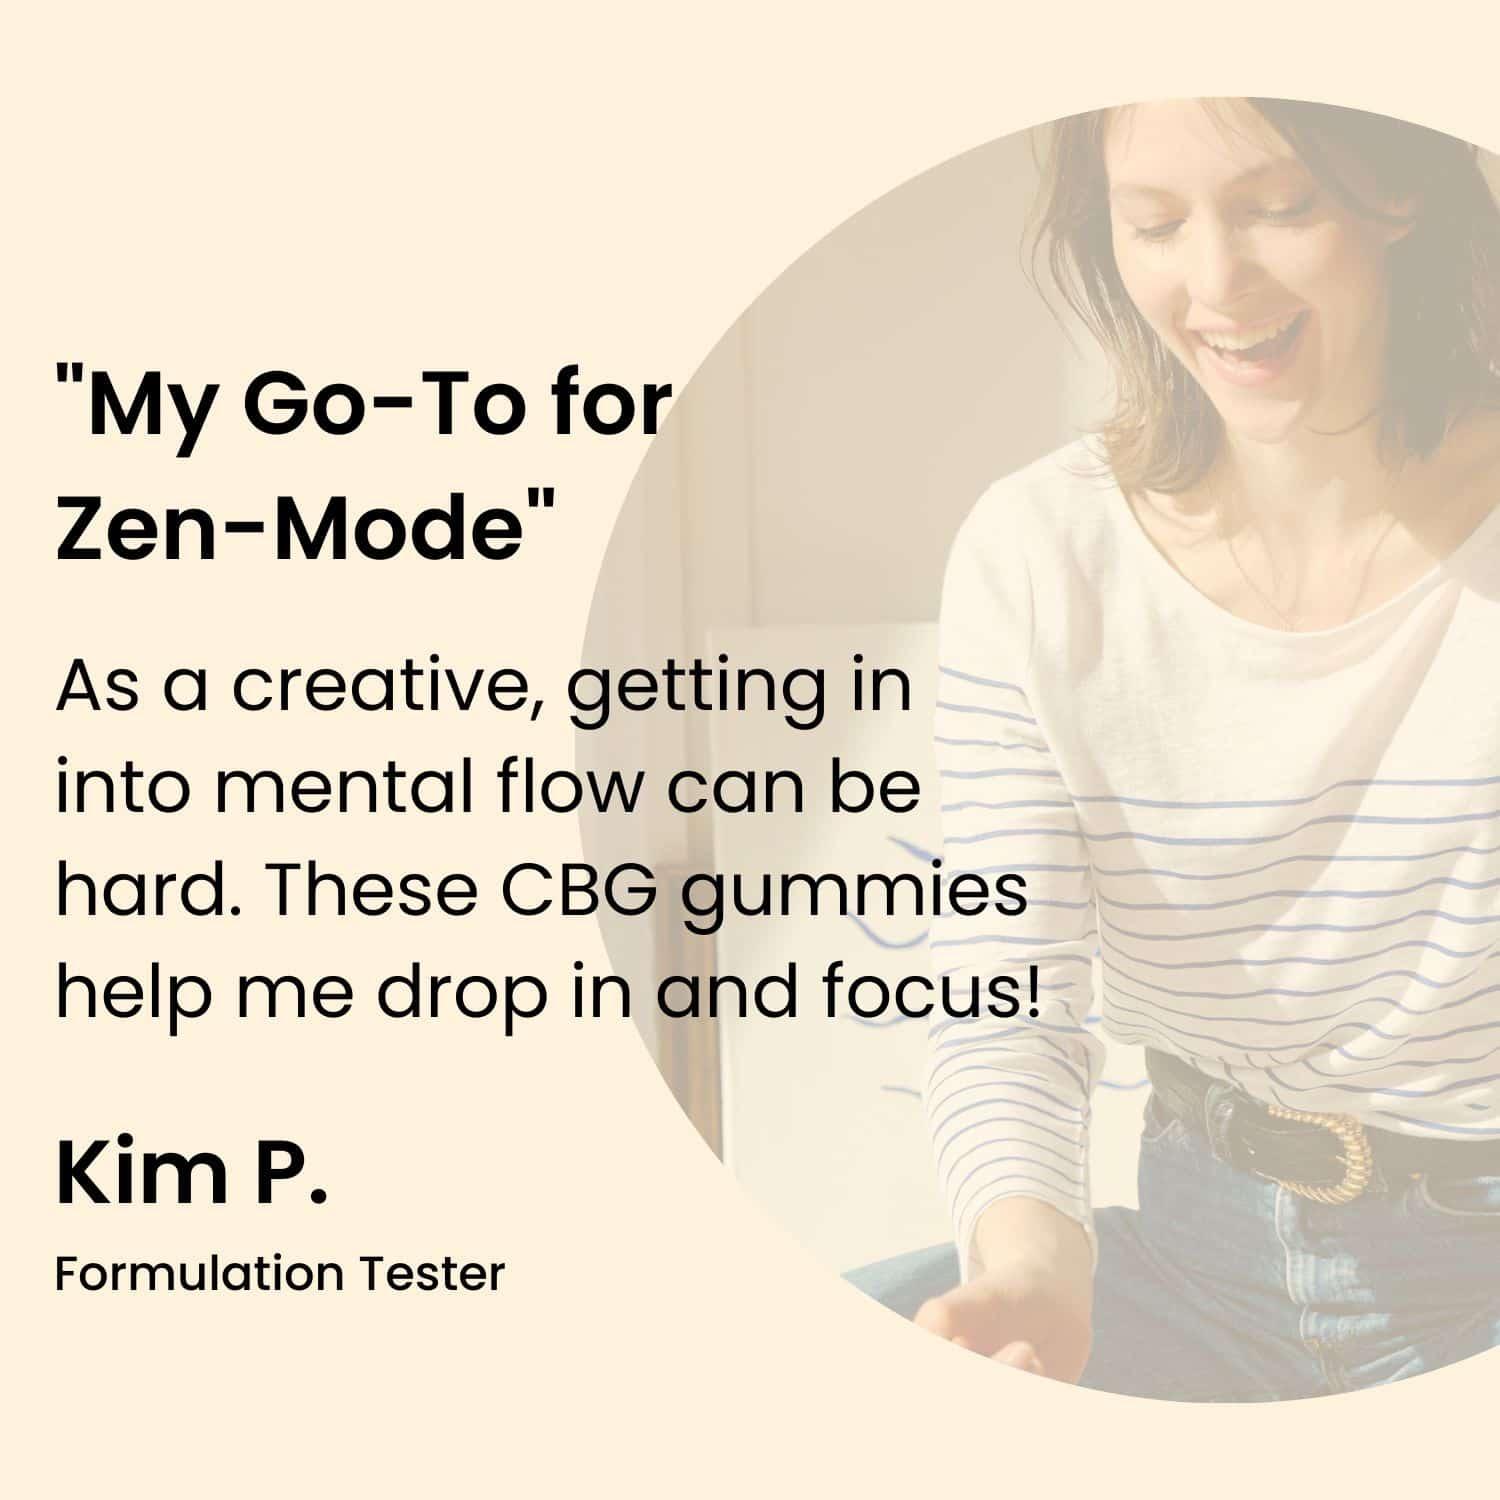 A satisfied customer, Kim P., shares her endorsement of 'Extra Strength CBG Gummies' for providing a focused calm, aiding her to achieve a mental flow state for creativity and concentration